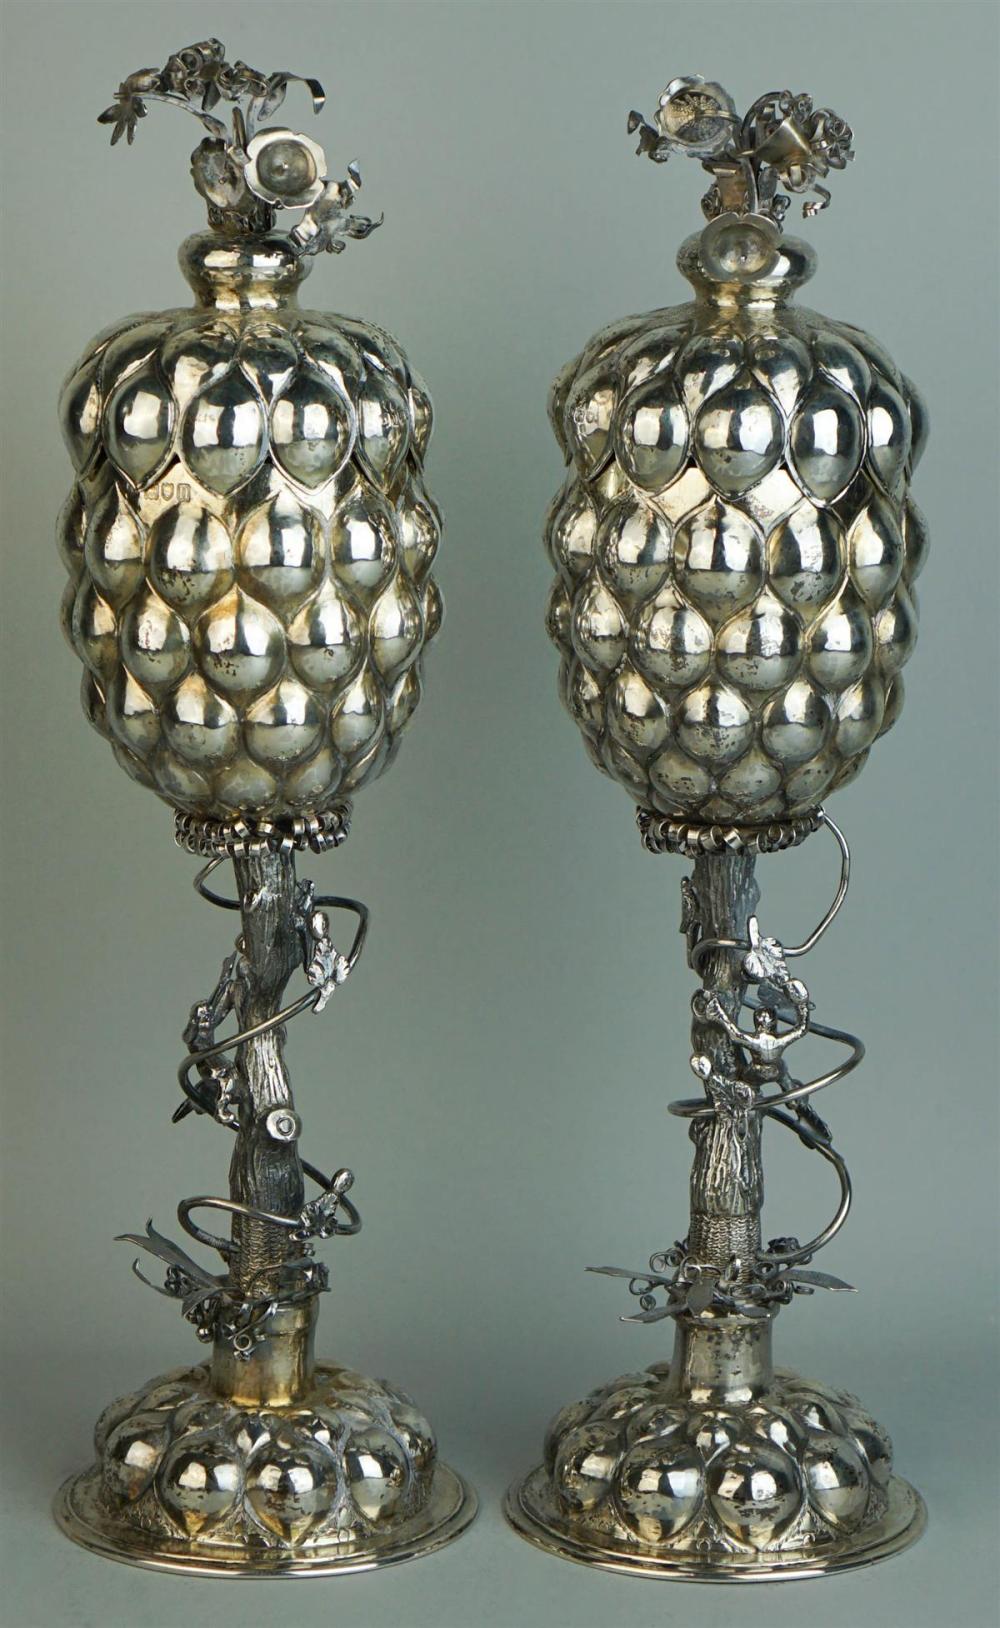 PAIR OF ENGLISH SILVER AND PARCEL-GILT